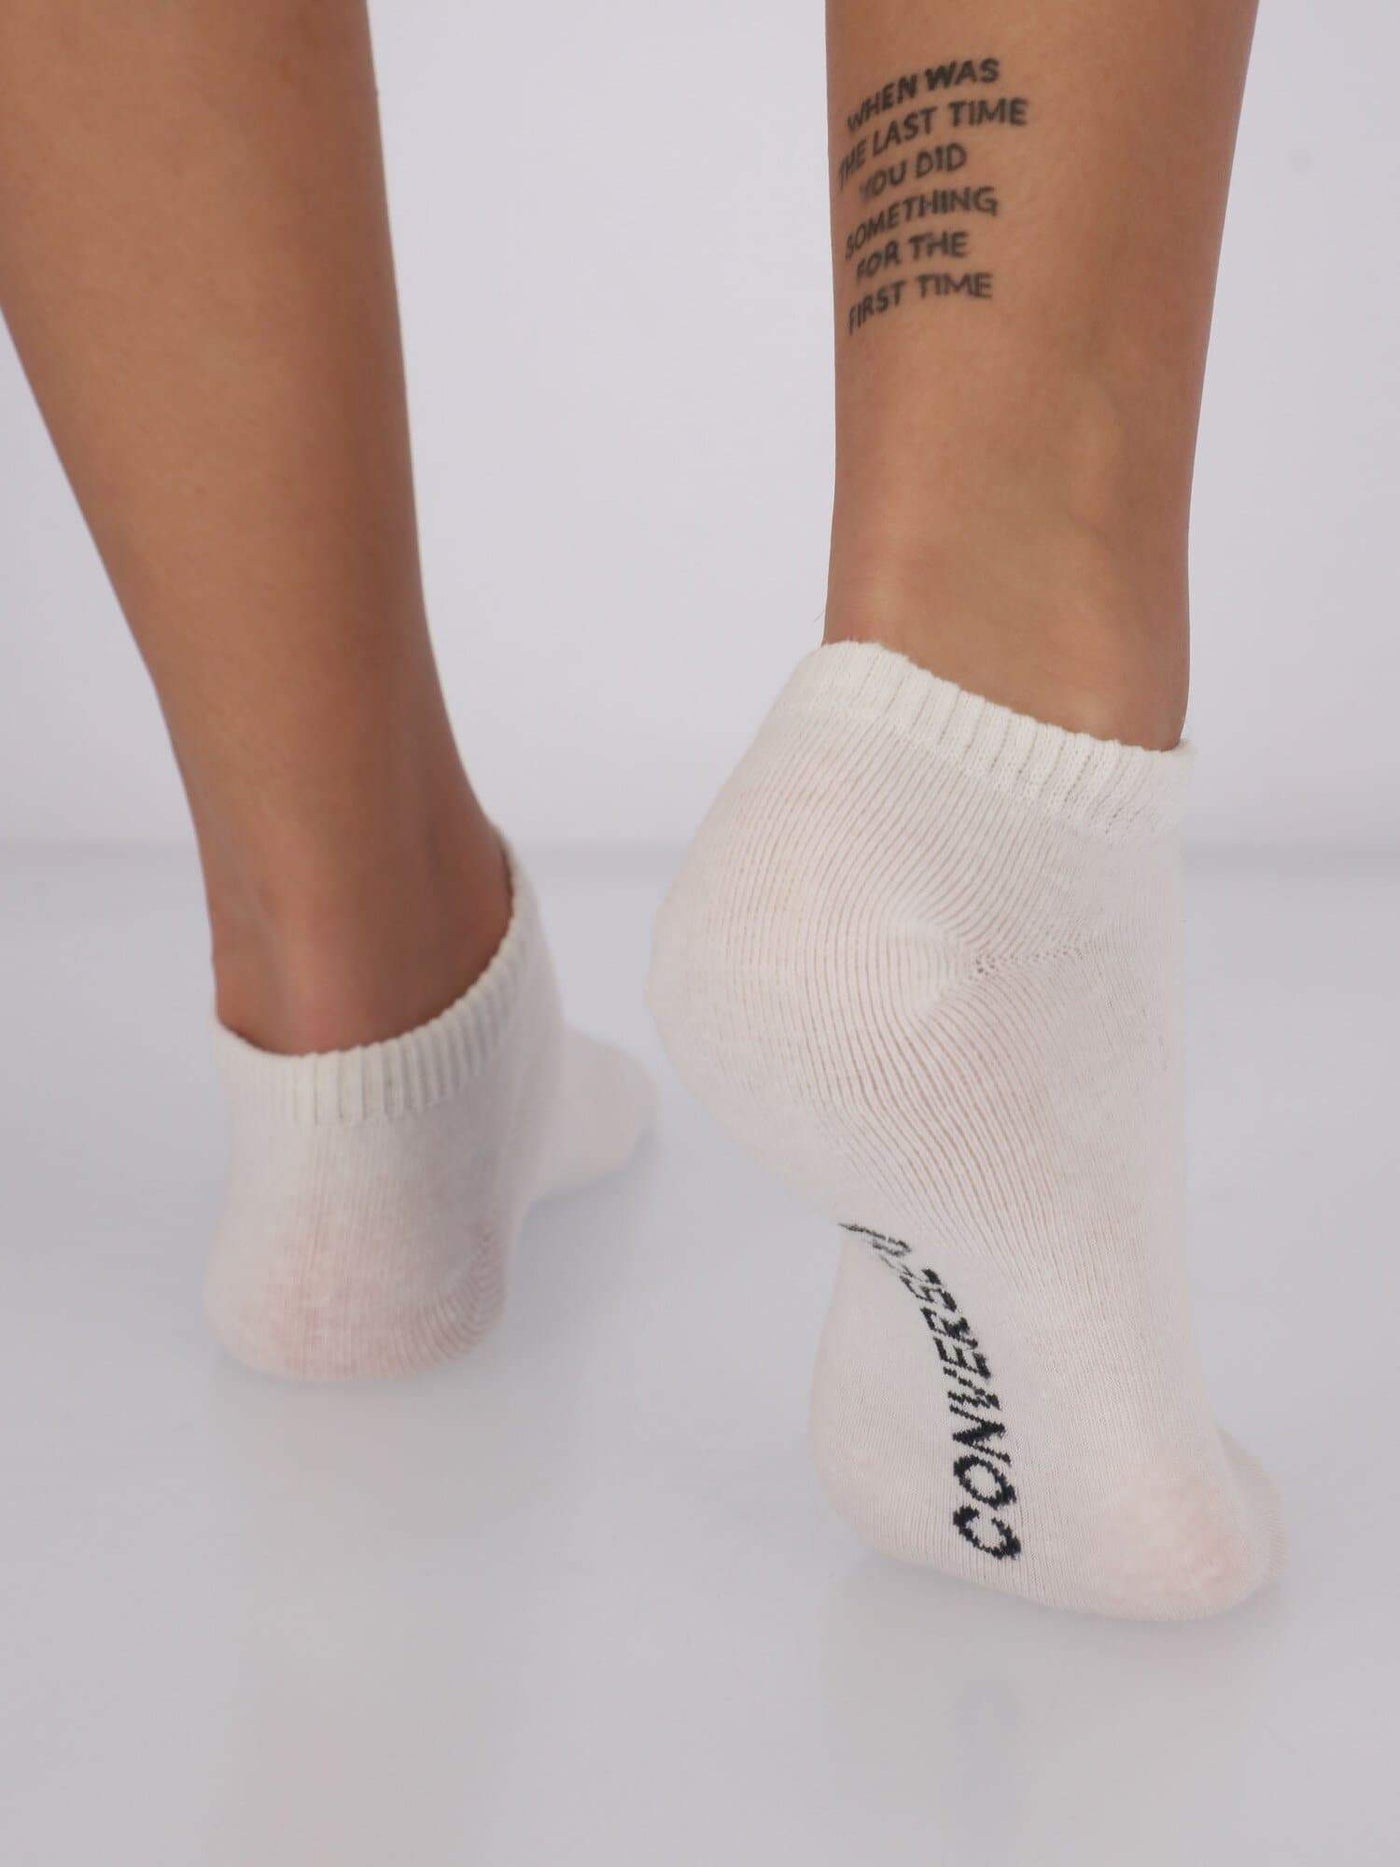 Converse Other Accessories Multi / 35-38 3 Pairs of Unisex Short Length Socks